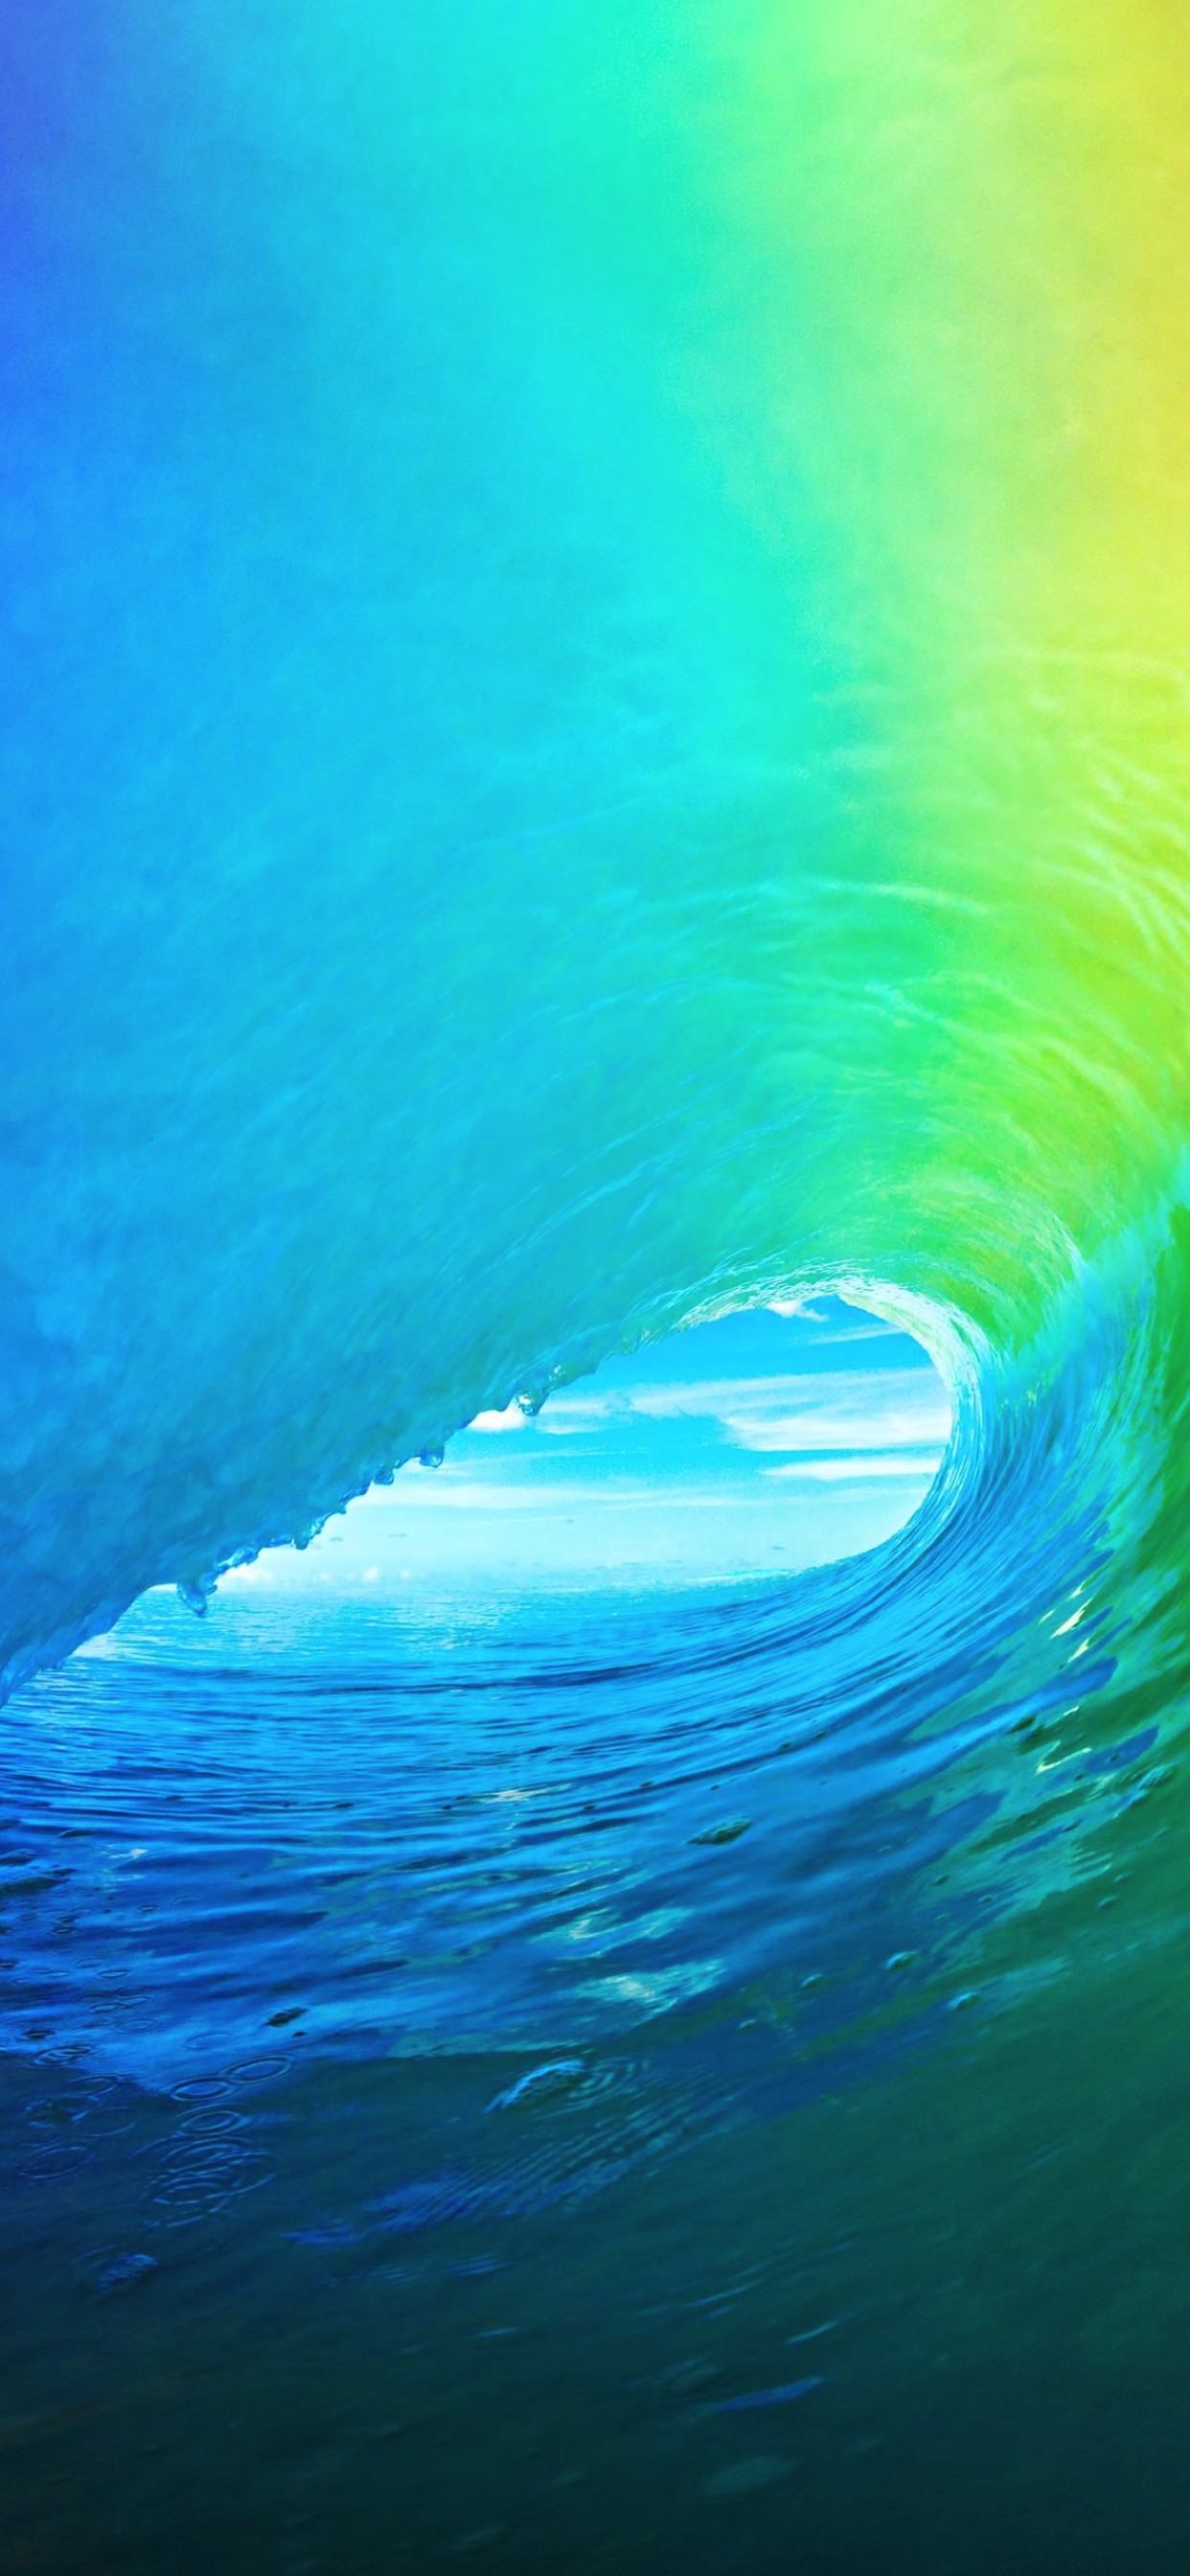 Landscape Ios9 Colorful Wave Wallpapersc Iphone Xs Max